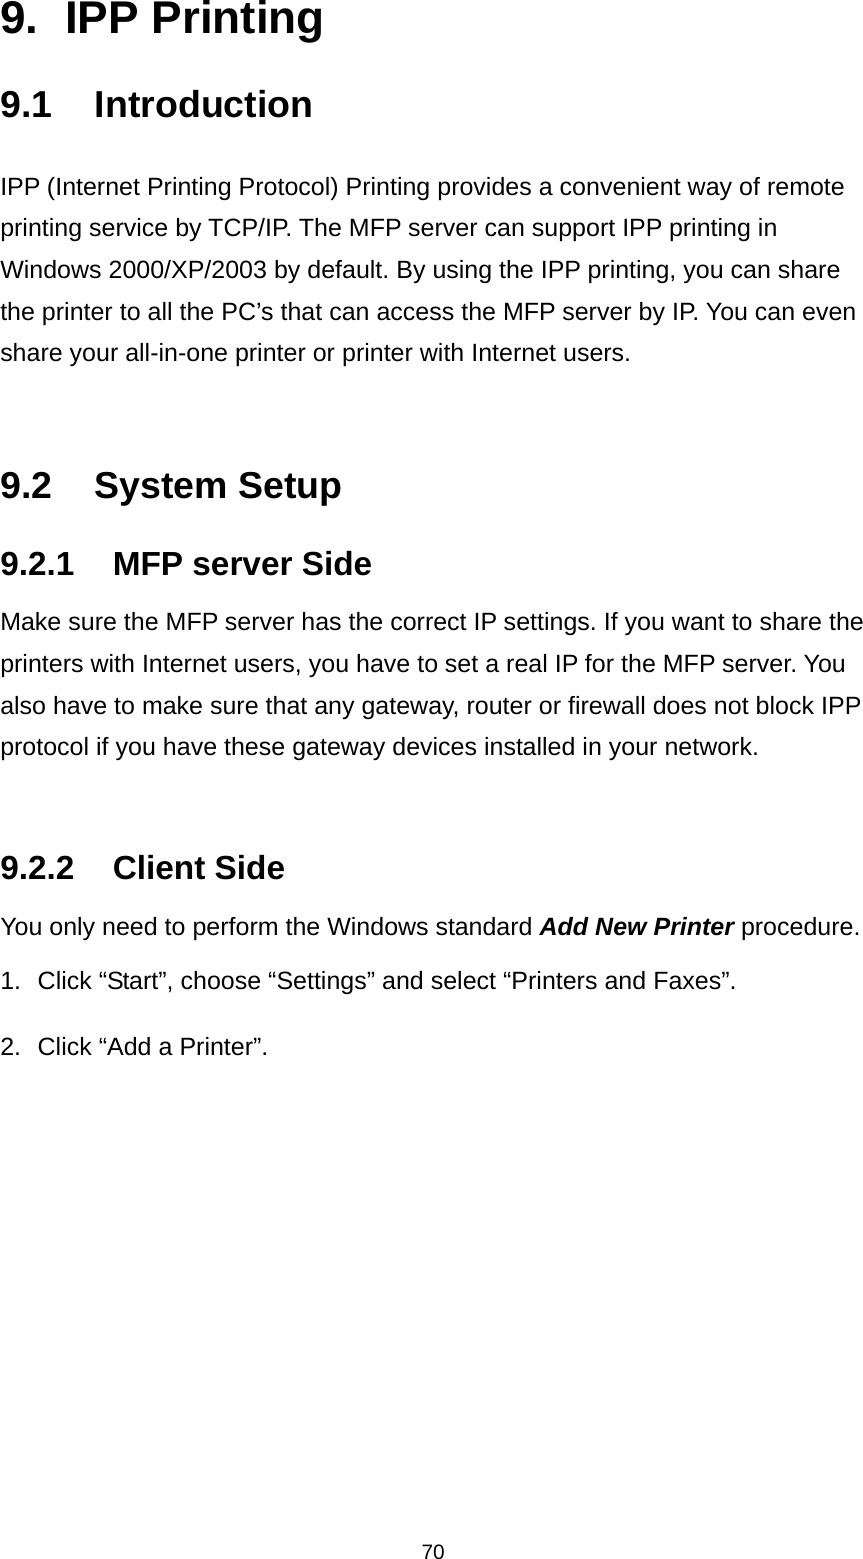 70 9. IPP Printing 9.1 Introduction IPP (Internet Printing Protocol) Printing provides a convenient way of remote printing service by TCP/IP. The MFP server can support IPP printing in Windows 2000/XP/2003 by default. By using the IPP printing, you can share the printer to all the PC’s that can access the MFP server by IP. You can even share your all-in-one printer or printer with Internet users.   9.2 System Setup 9.2.1  MFP server Side Make sure the MFP server has the correct IP settings. If you want to share the printers with Internet users, you have to set a real IP for the MFP server. You also have to make sure that any gateway, router or firewall does not block IPP protocol if you have these gateway devices installed in your network.   9.2.2 Client Side You only need to perform the Windows standard Add New Printer procedure. 1.  Click “Start”, choose “Settings” and select “Printers and Faxes”. 2.  Click “Add a Printer”.    